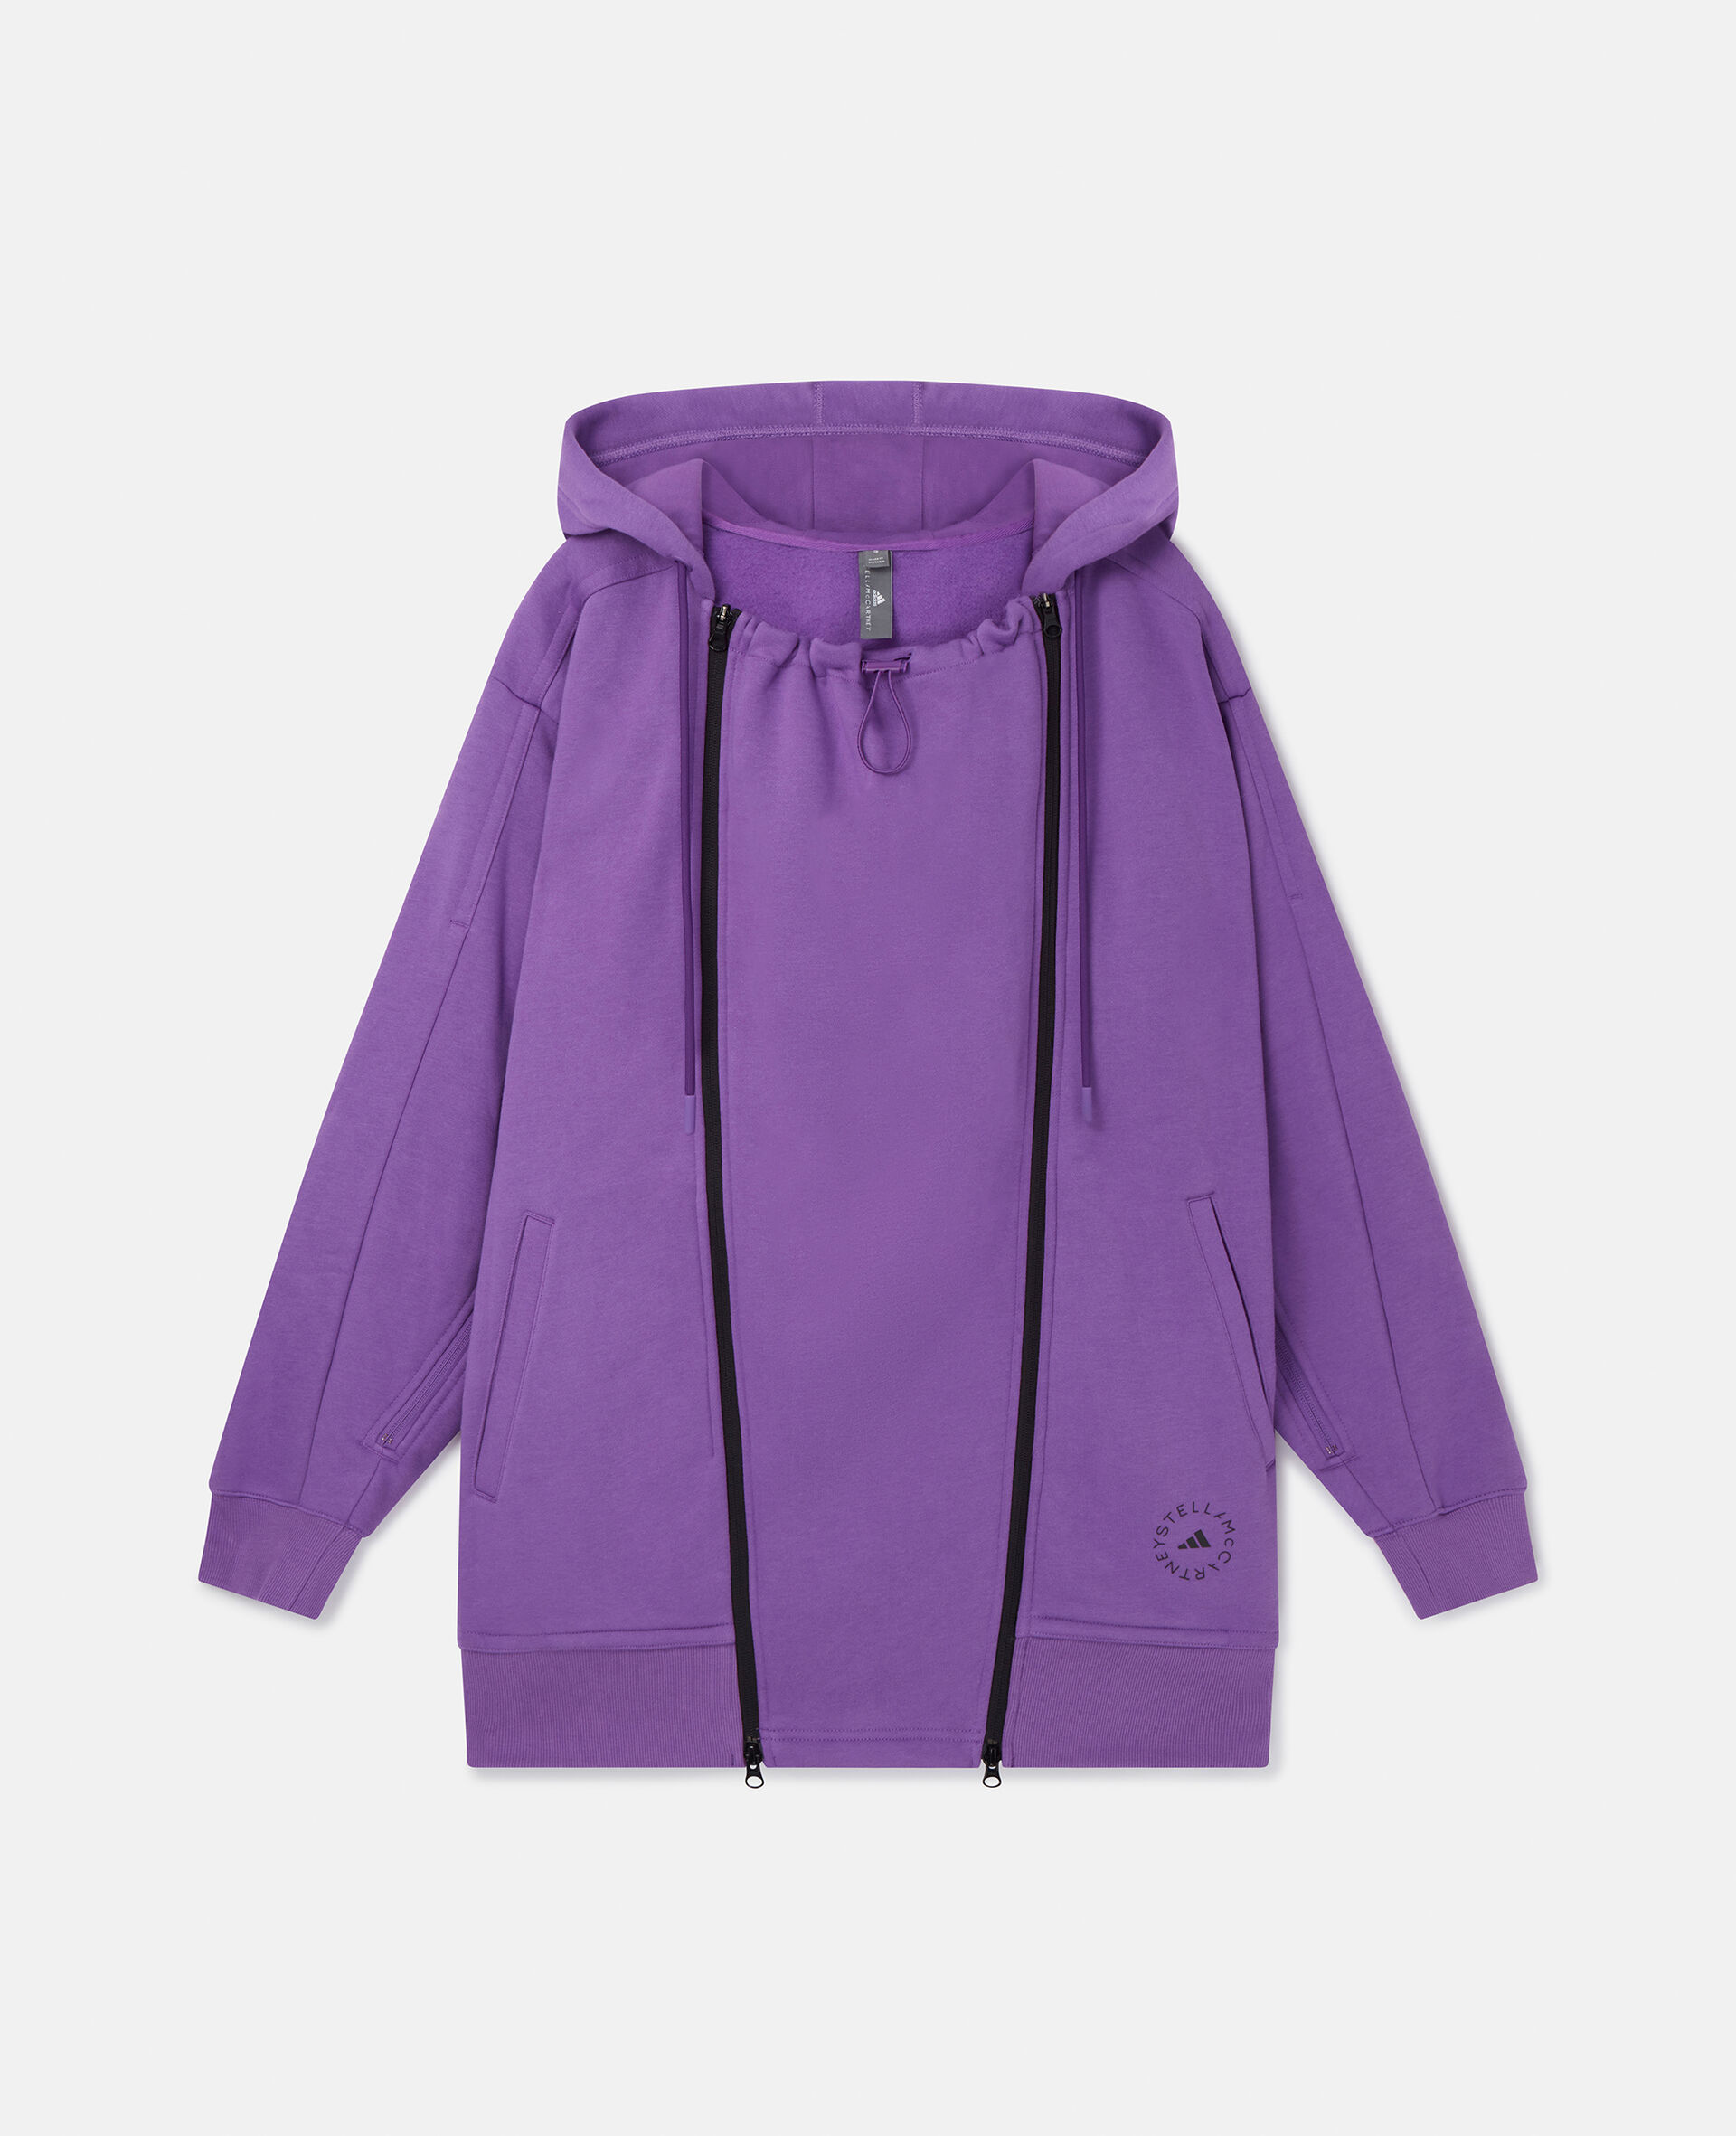 Maternity 3 in 1 Jacket-Purple-large image number 0